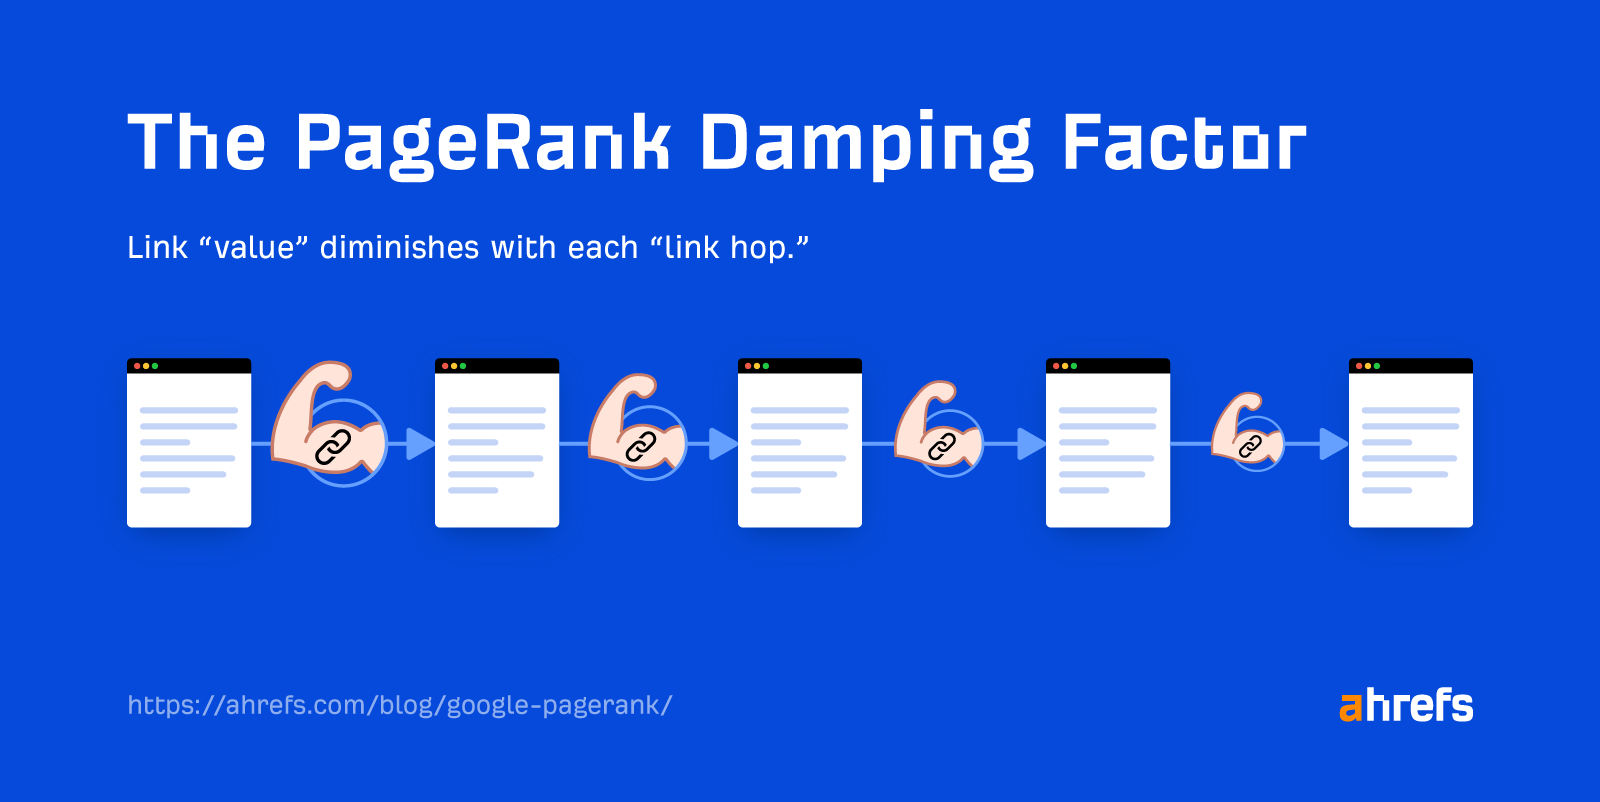 Example s،wing PageRank damping factor